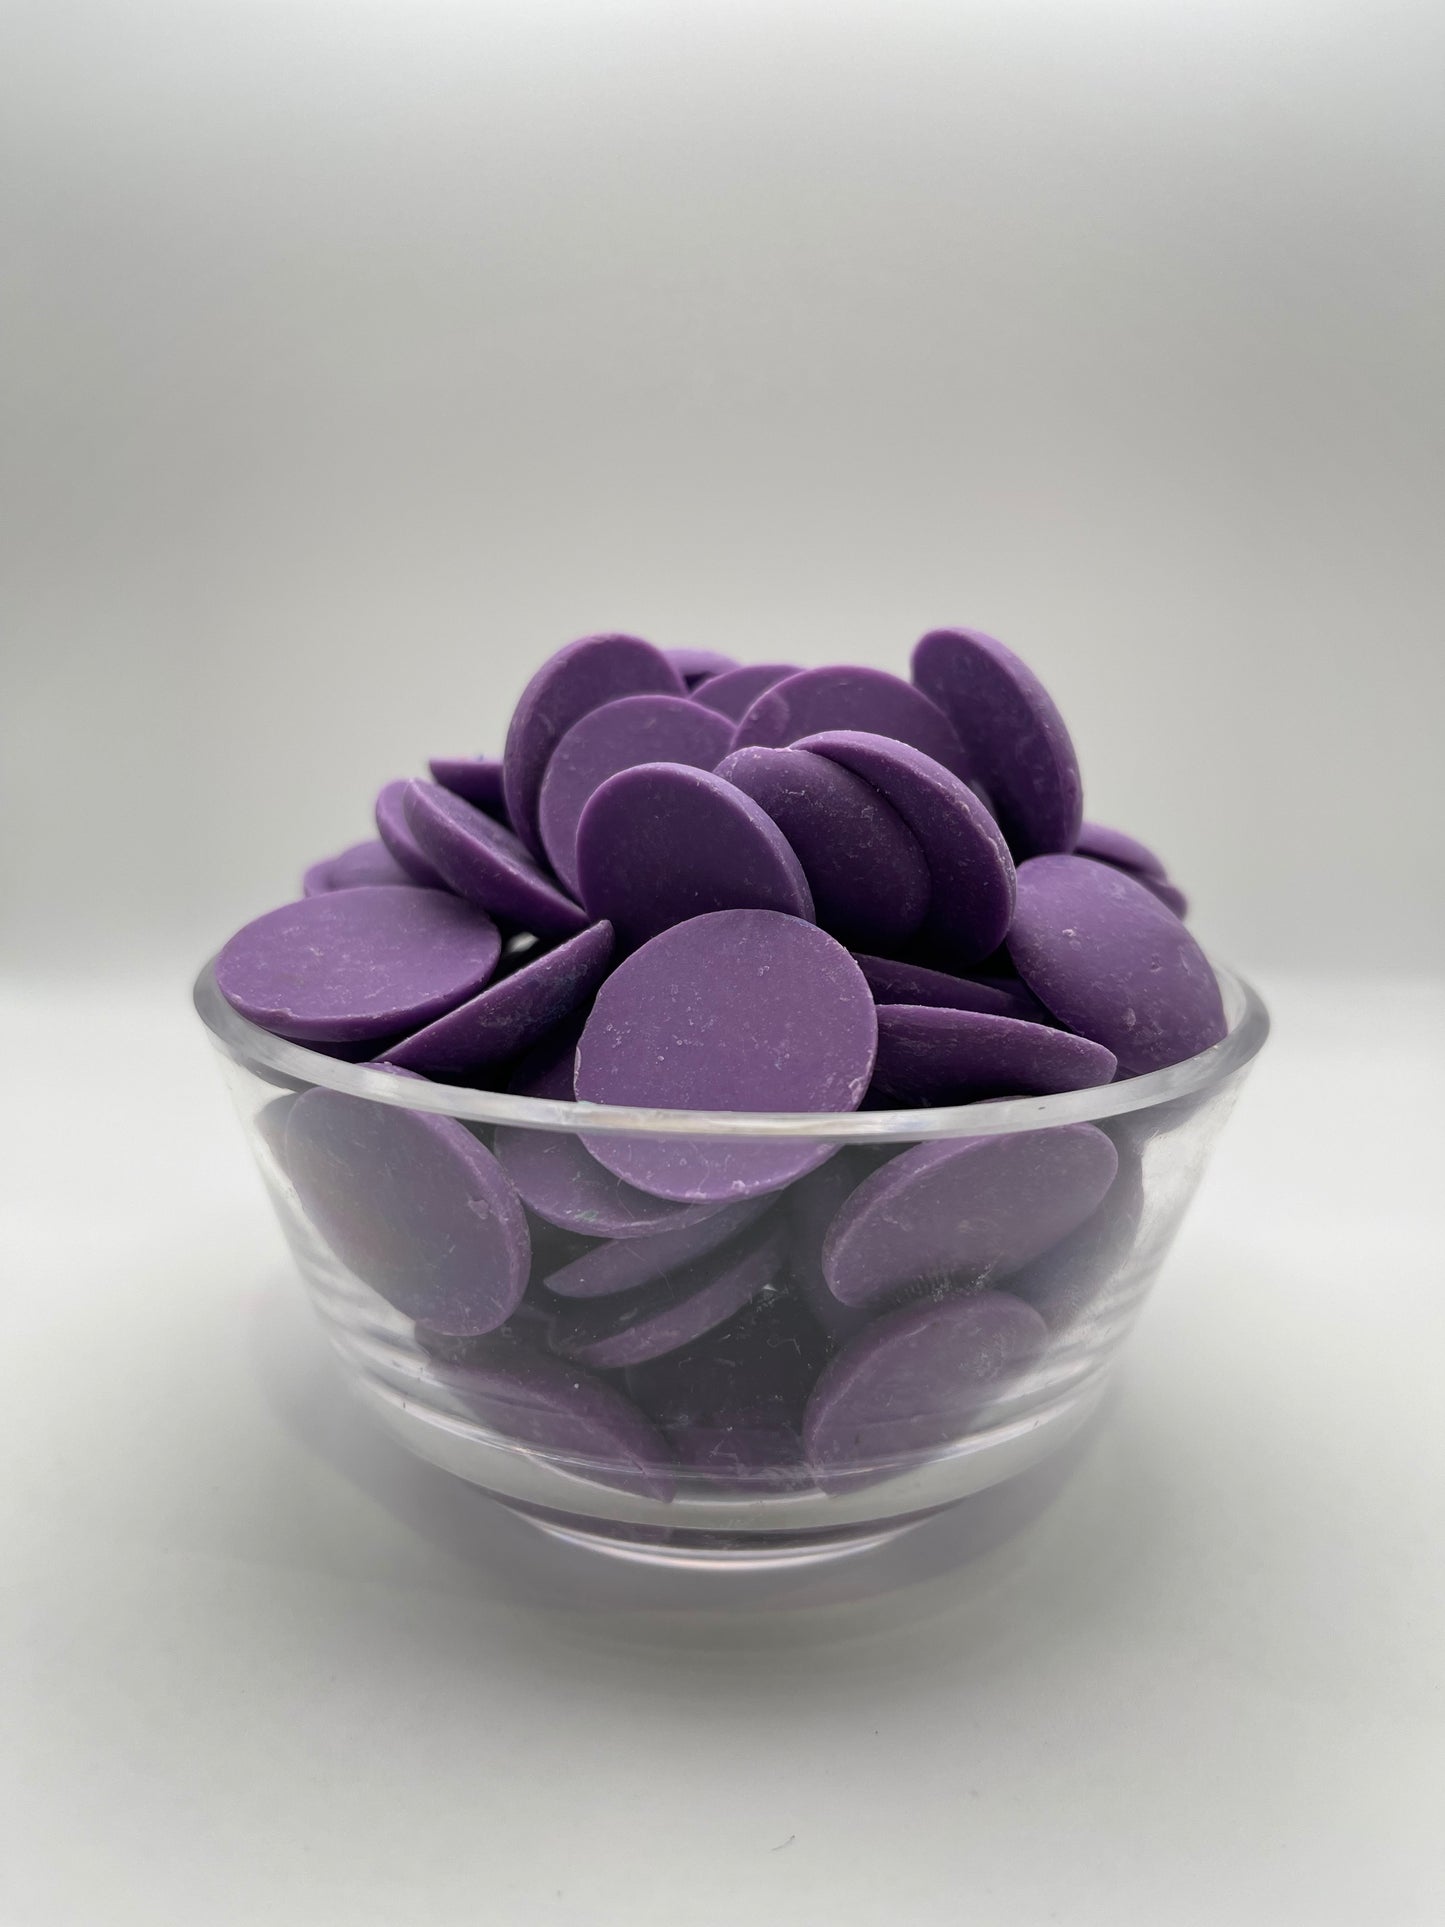 Merckens Chocolate Candy Melts Orchid